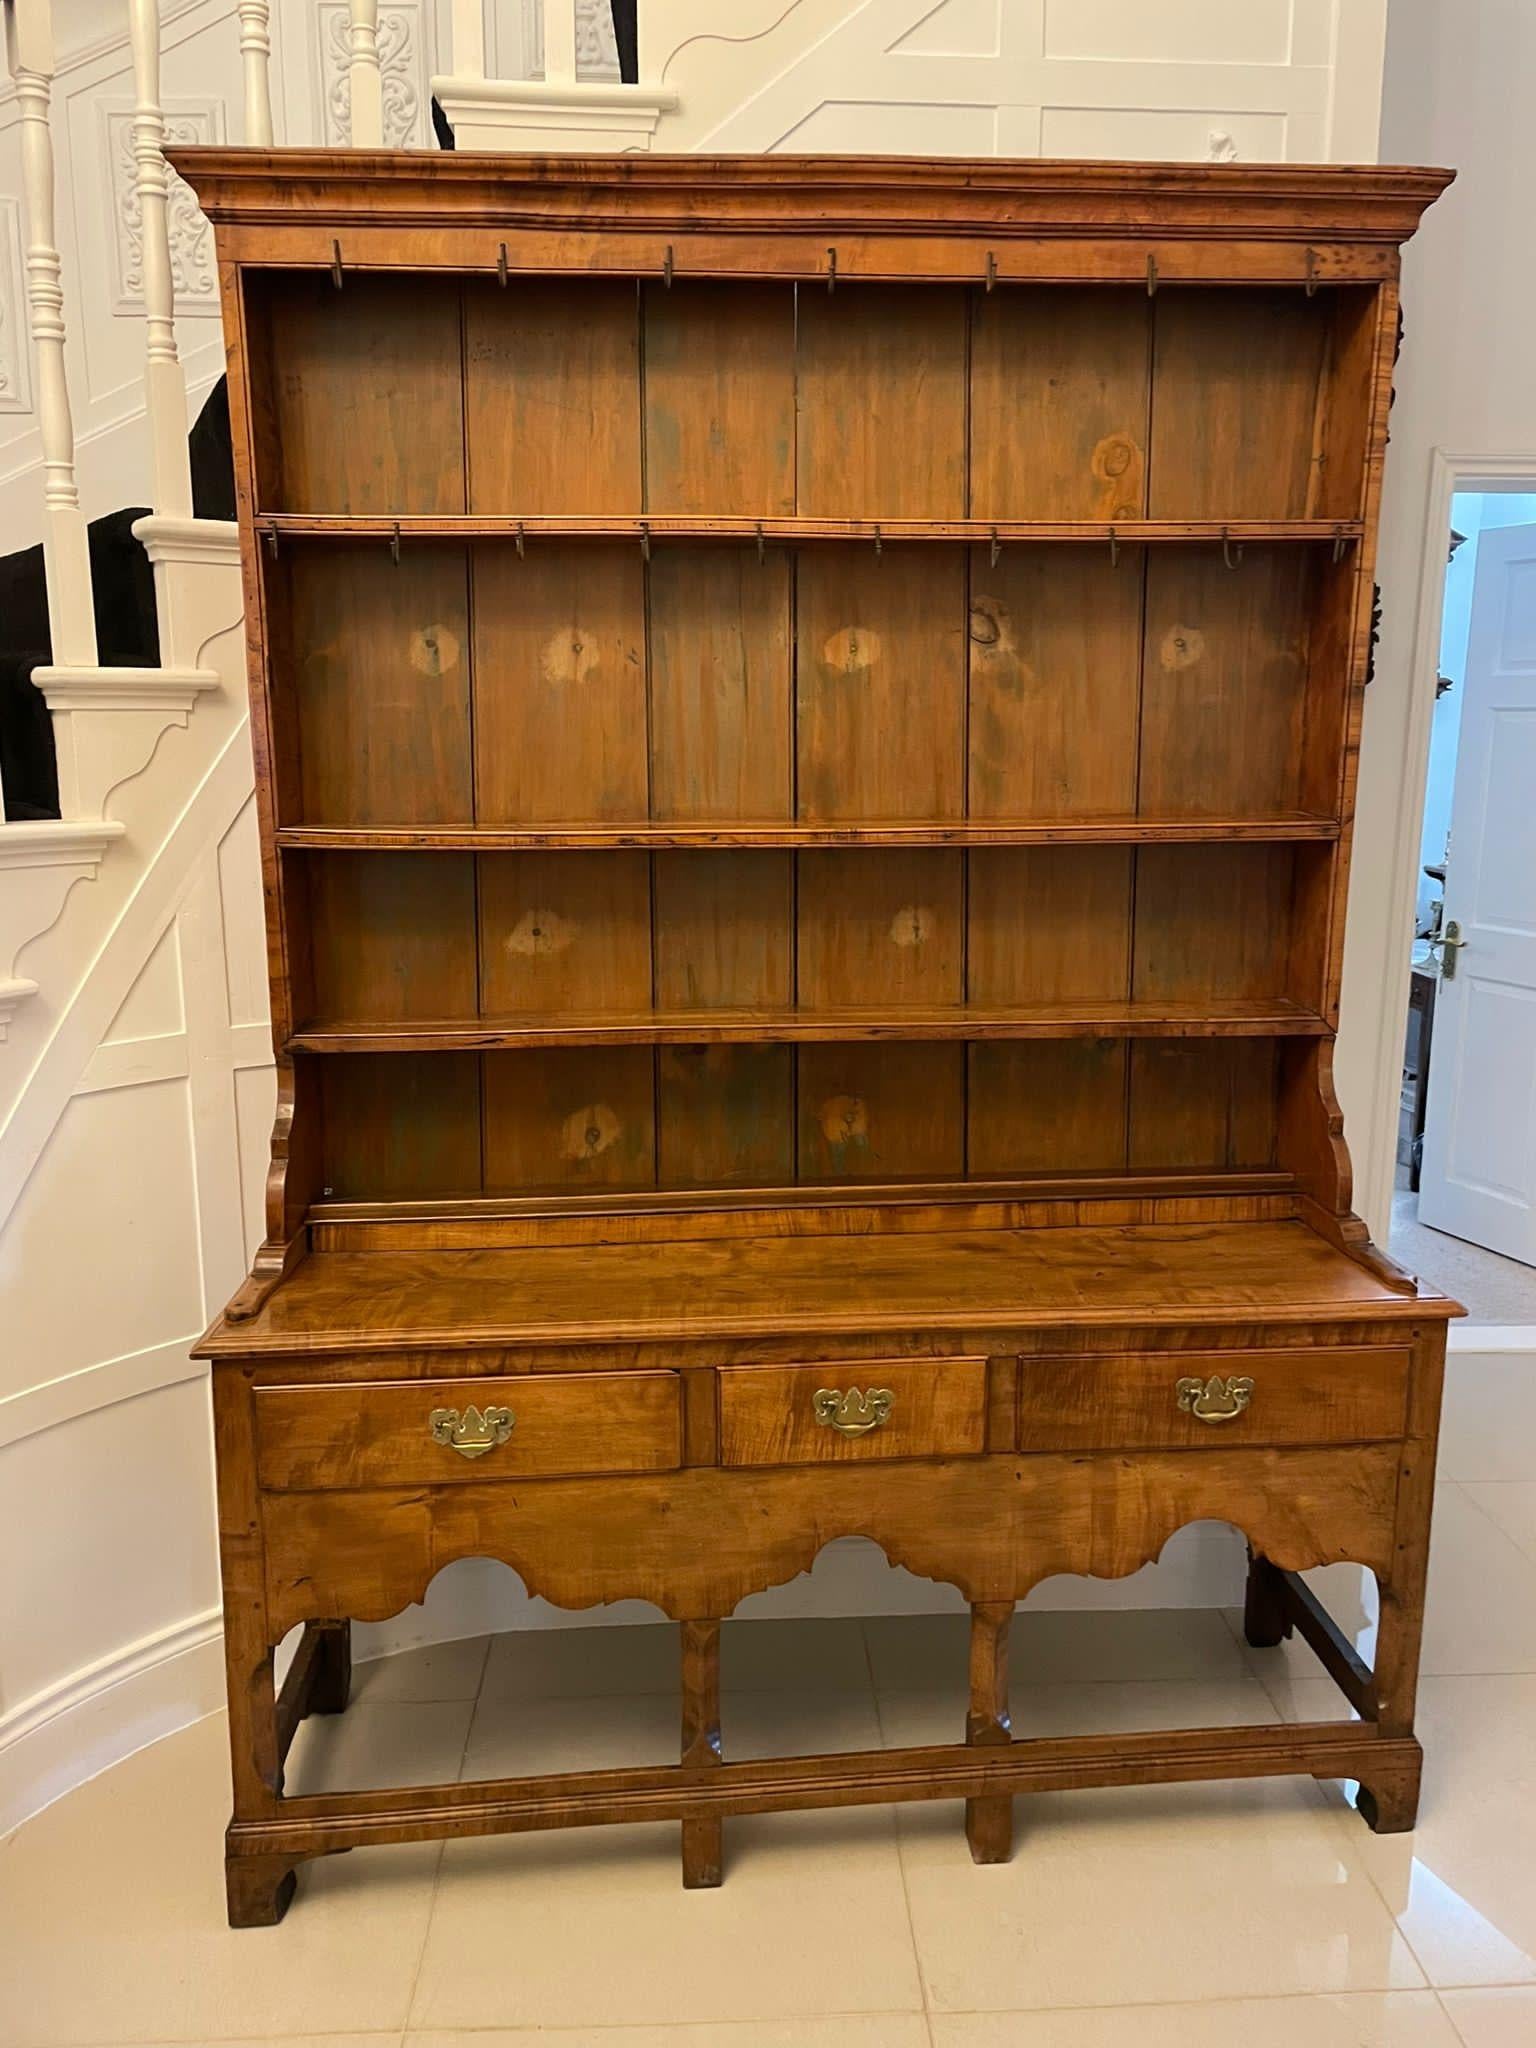 Rare American Antique George III Quality Solid Maple Wood Dresser and Rack For Sale 8